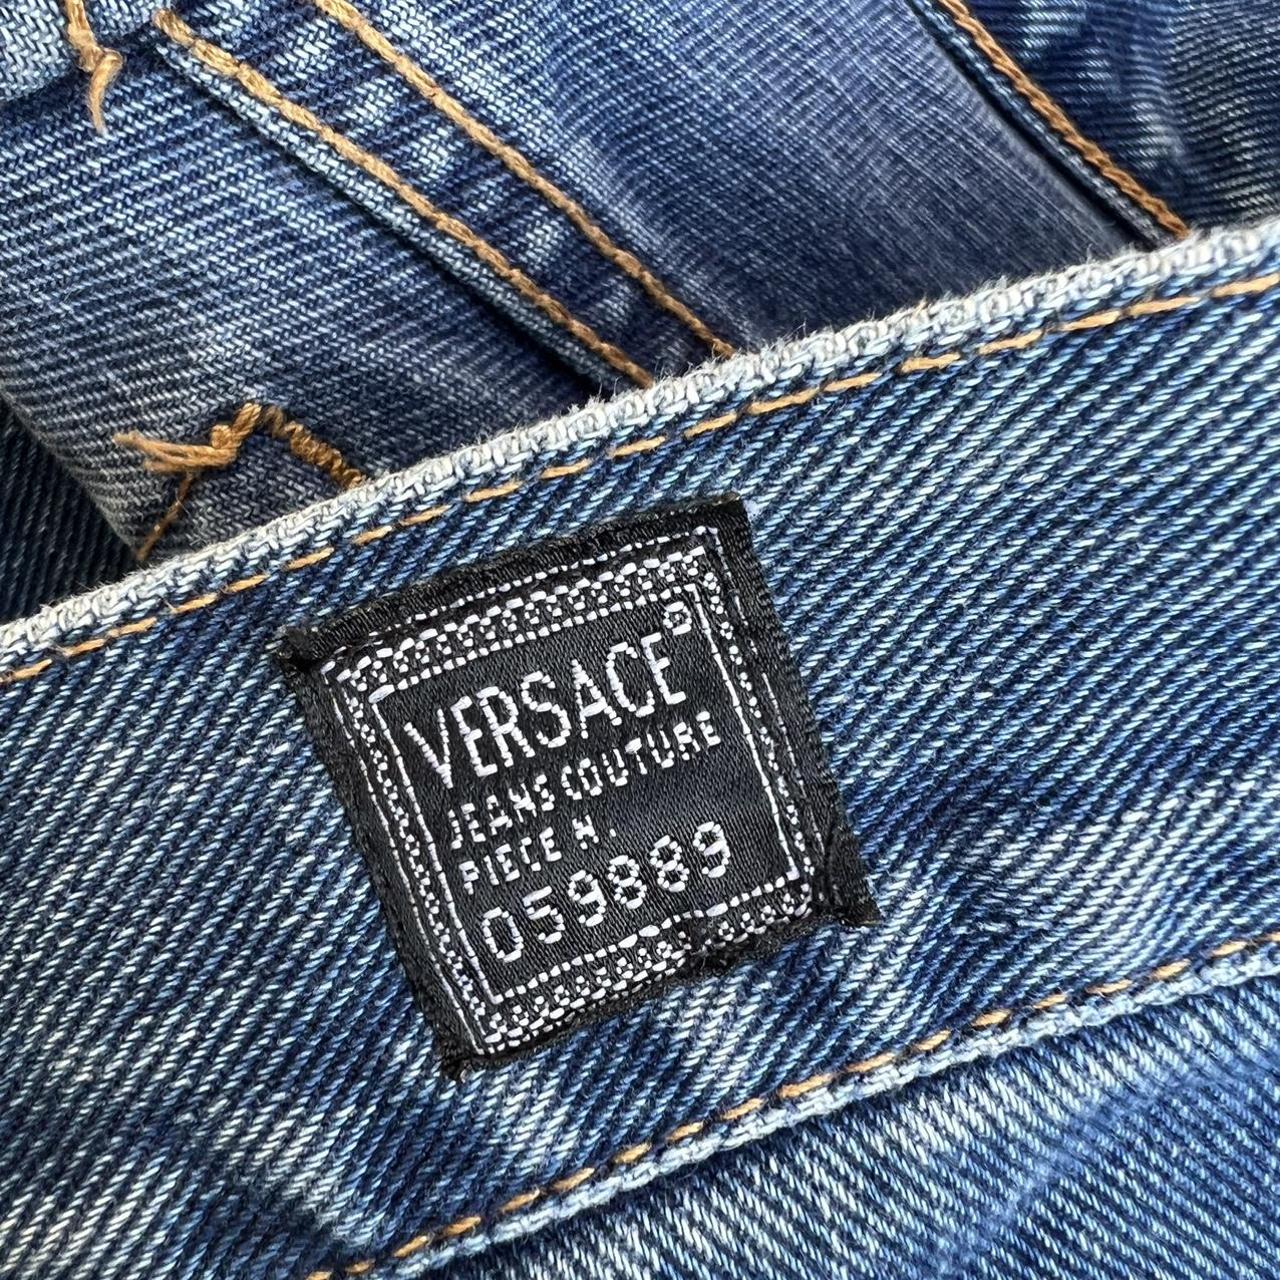 Versace Jeans Couture Women's Blue and Black Jeans | Depop